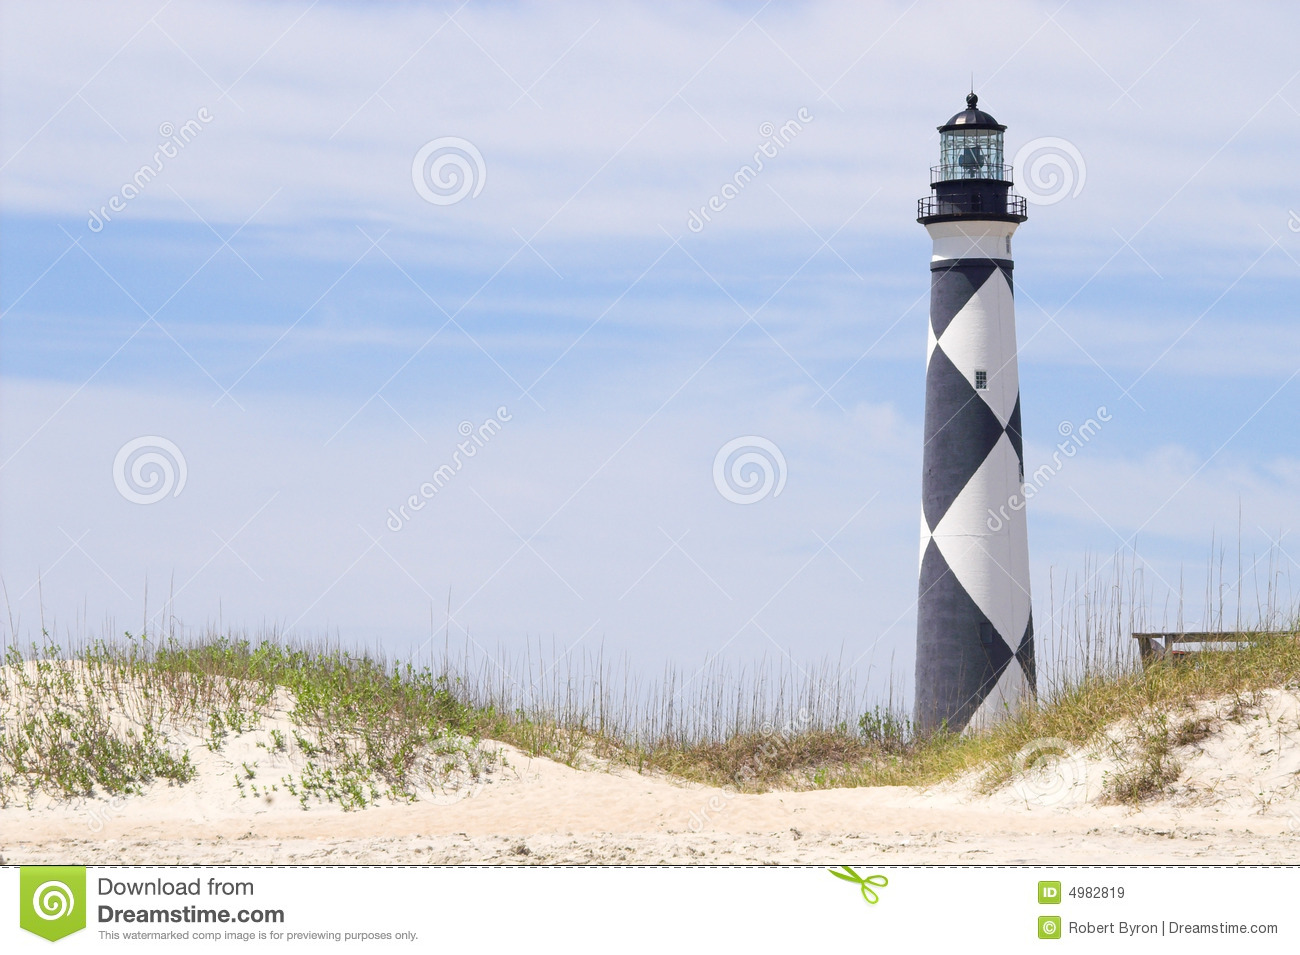 Cape Lookout Lighthouse Royalty Free Stock Images   Image  4982819